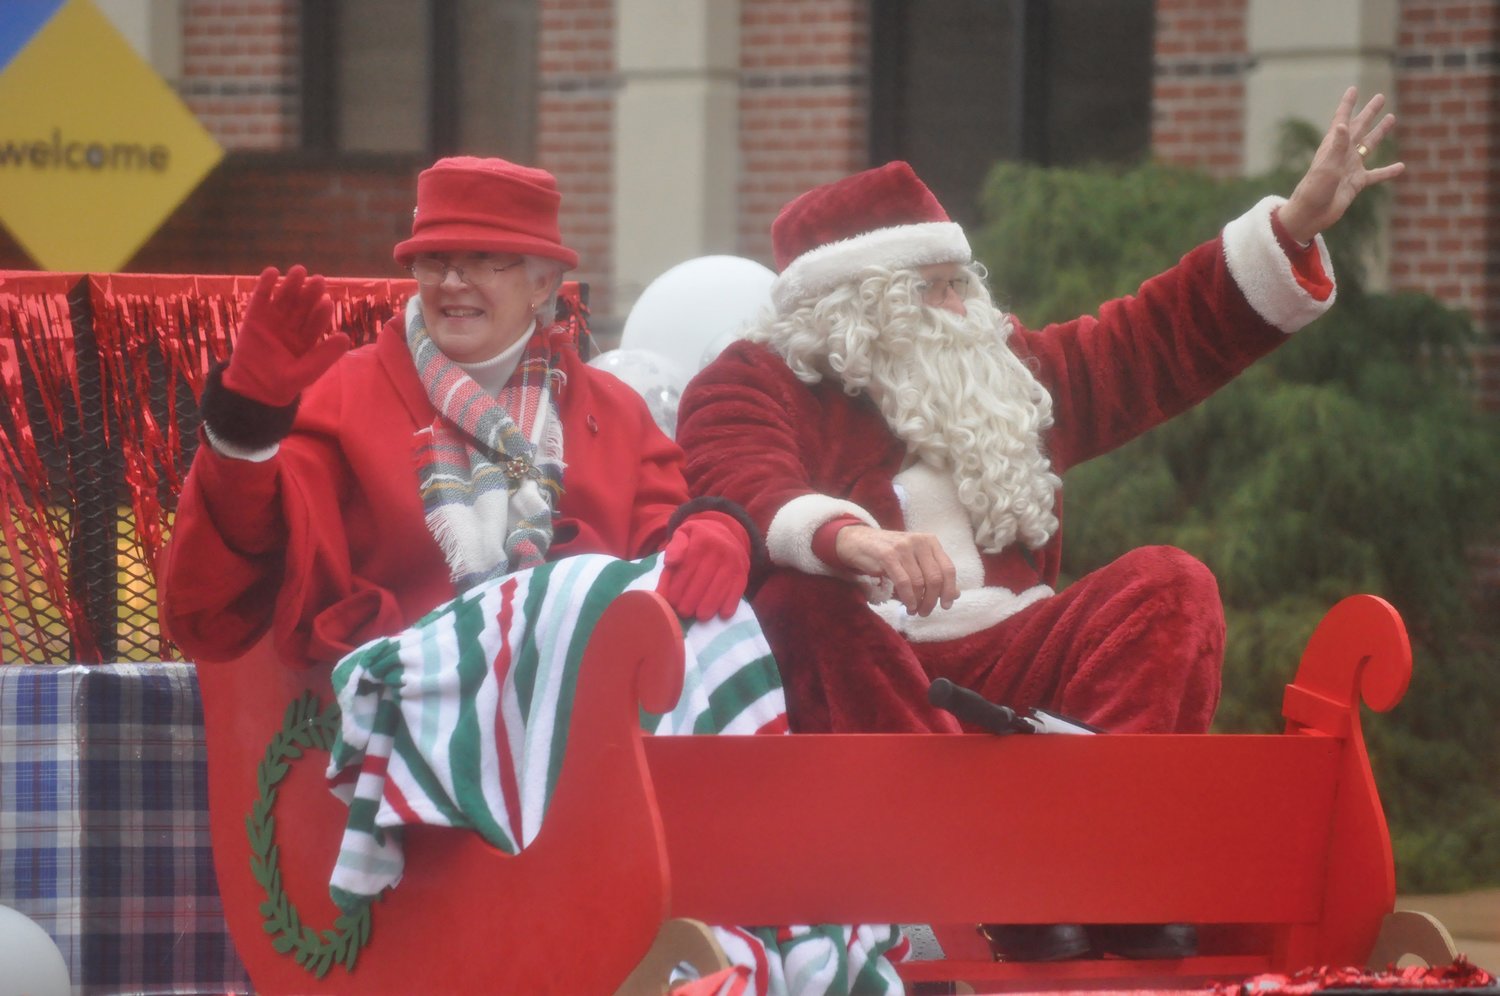 Santa and Mrs. Claus are again the honored guests at the annual Crawfordsville/Montgomery County Chamber of Commerce Christmas Parade, which begins at 2 p.m. Sunday.